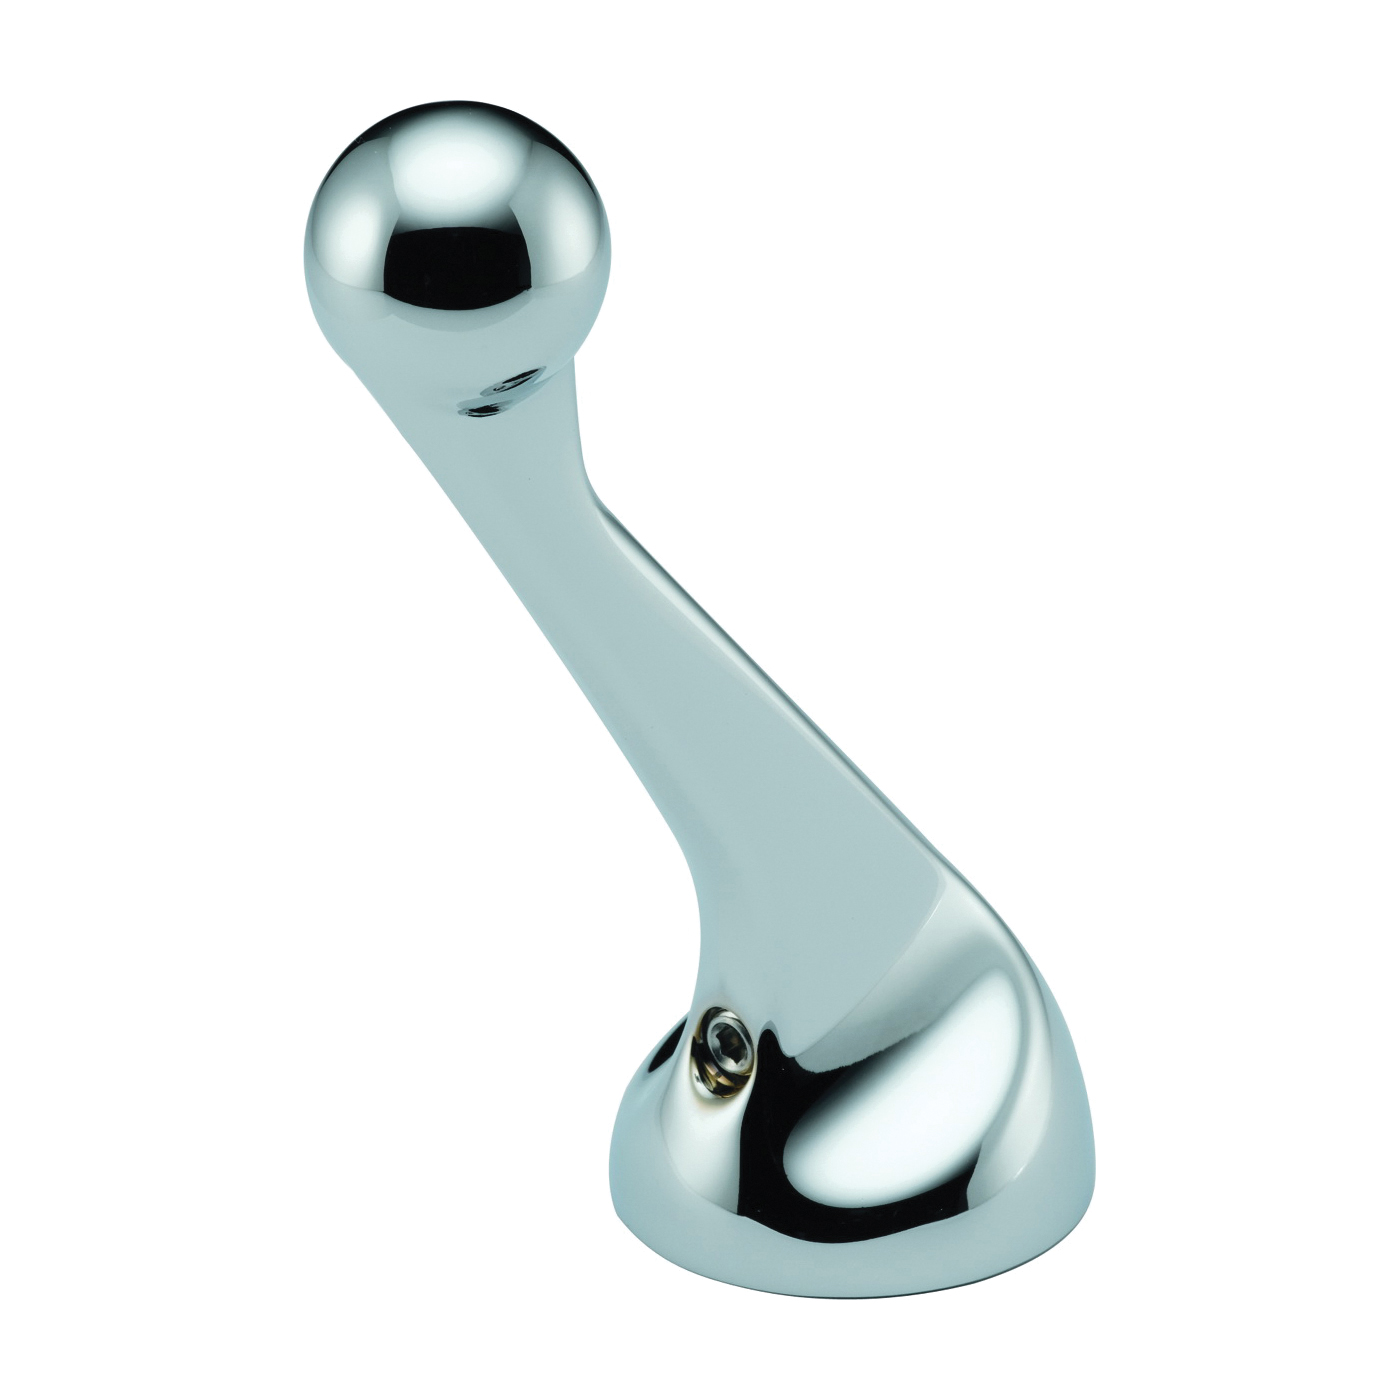 RP2393 Faucet Handle Kit, Metal, Chrome Plated, For: 100, 200, 300 and 400 Series Kitchen Faucets